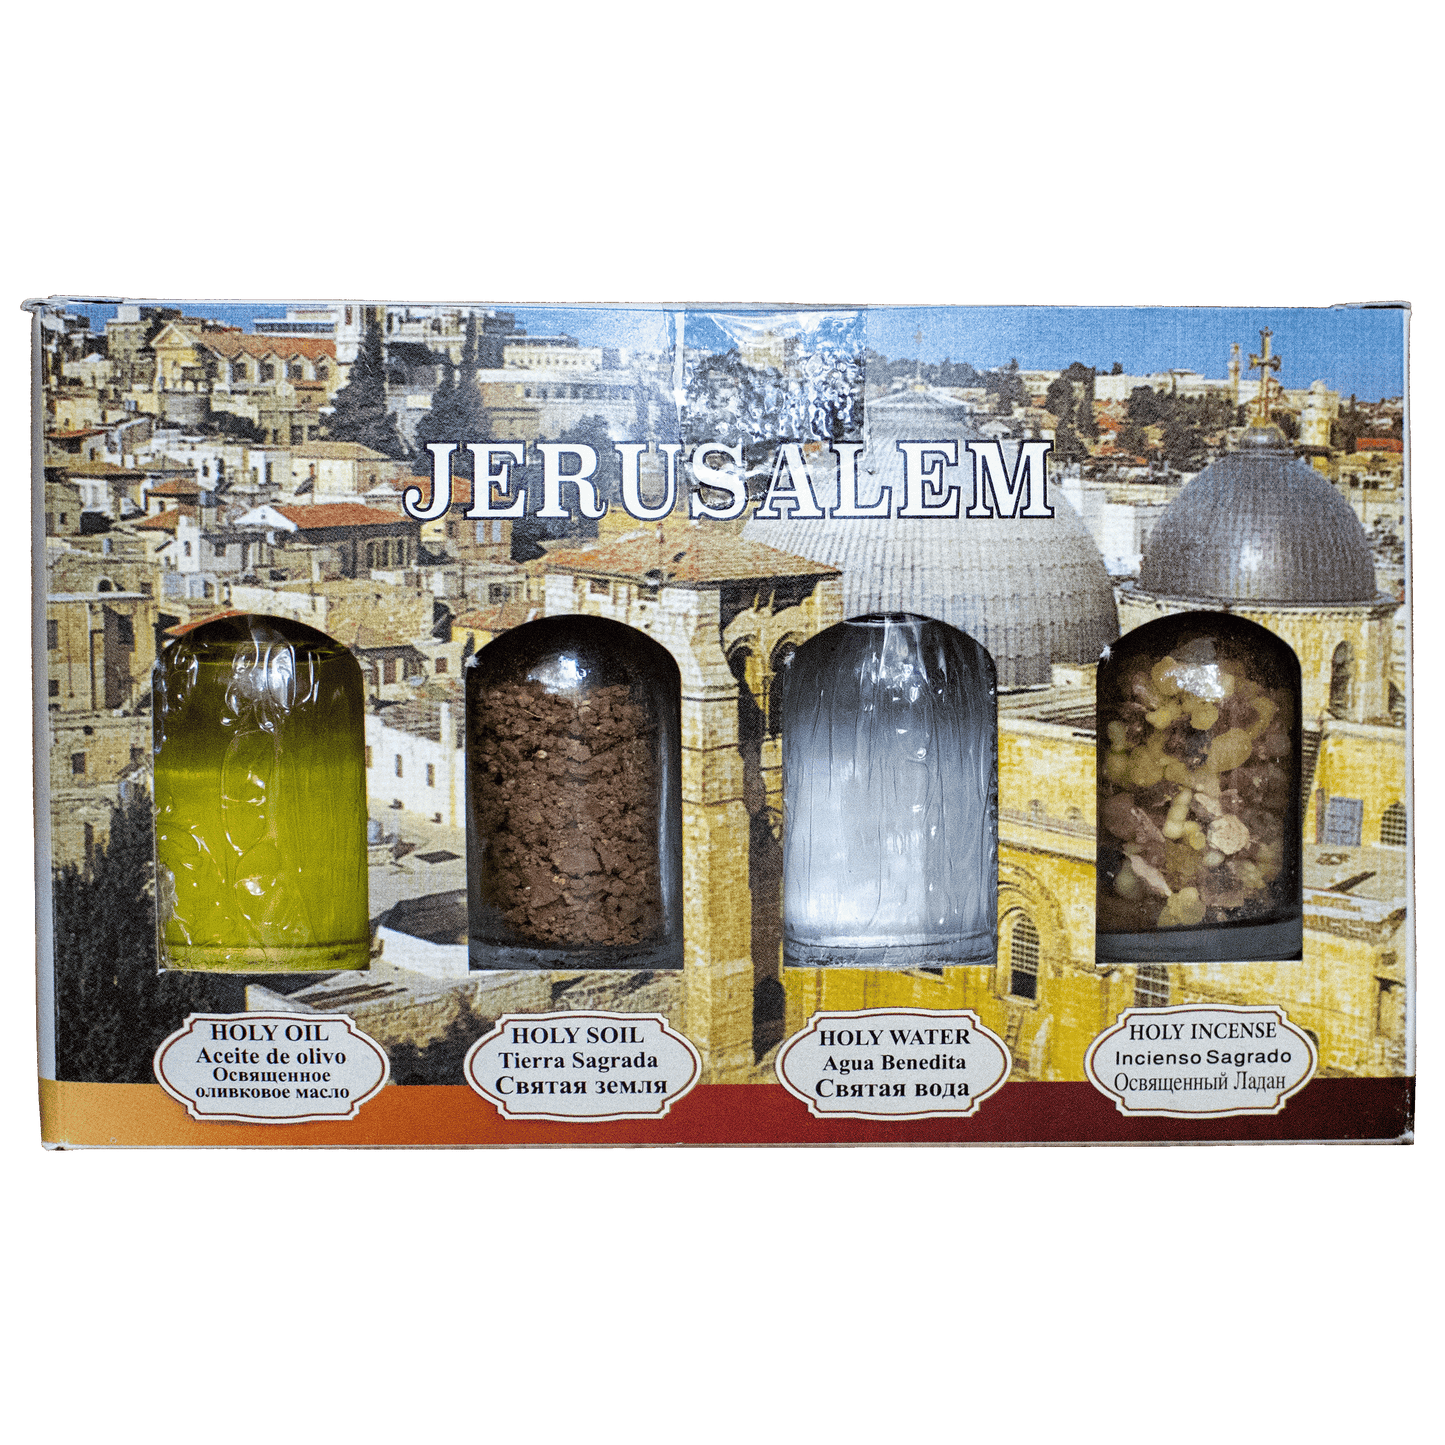 Four Genuine elements from Israel: Oil, Water, Soil, Incense